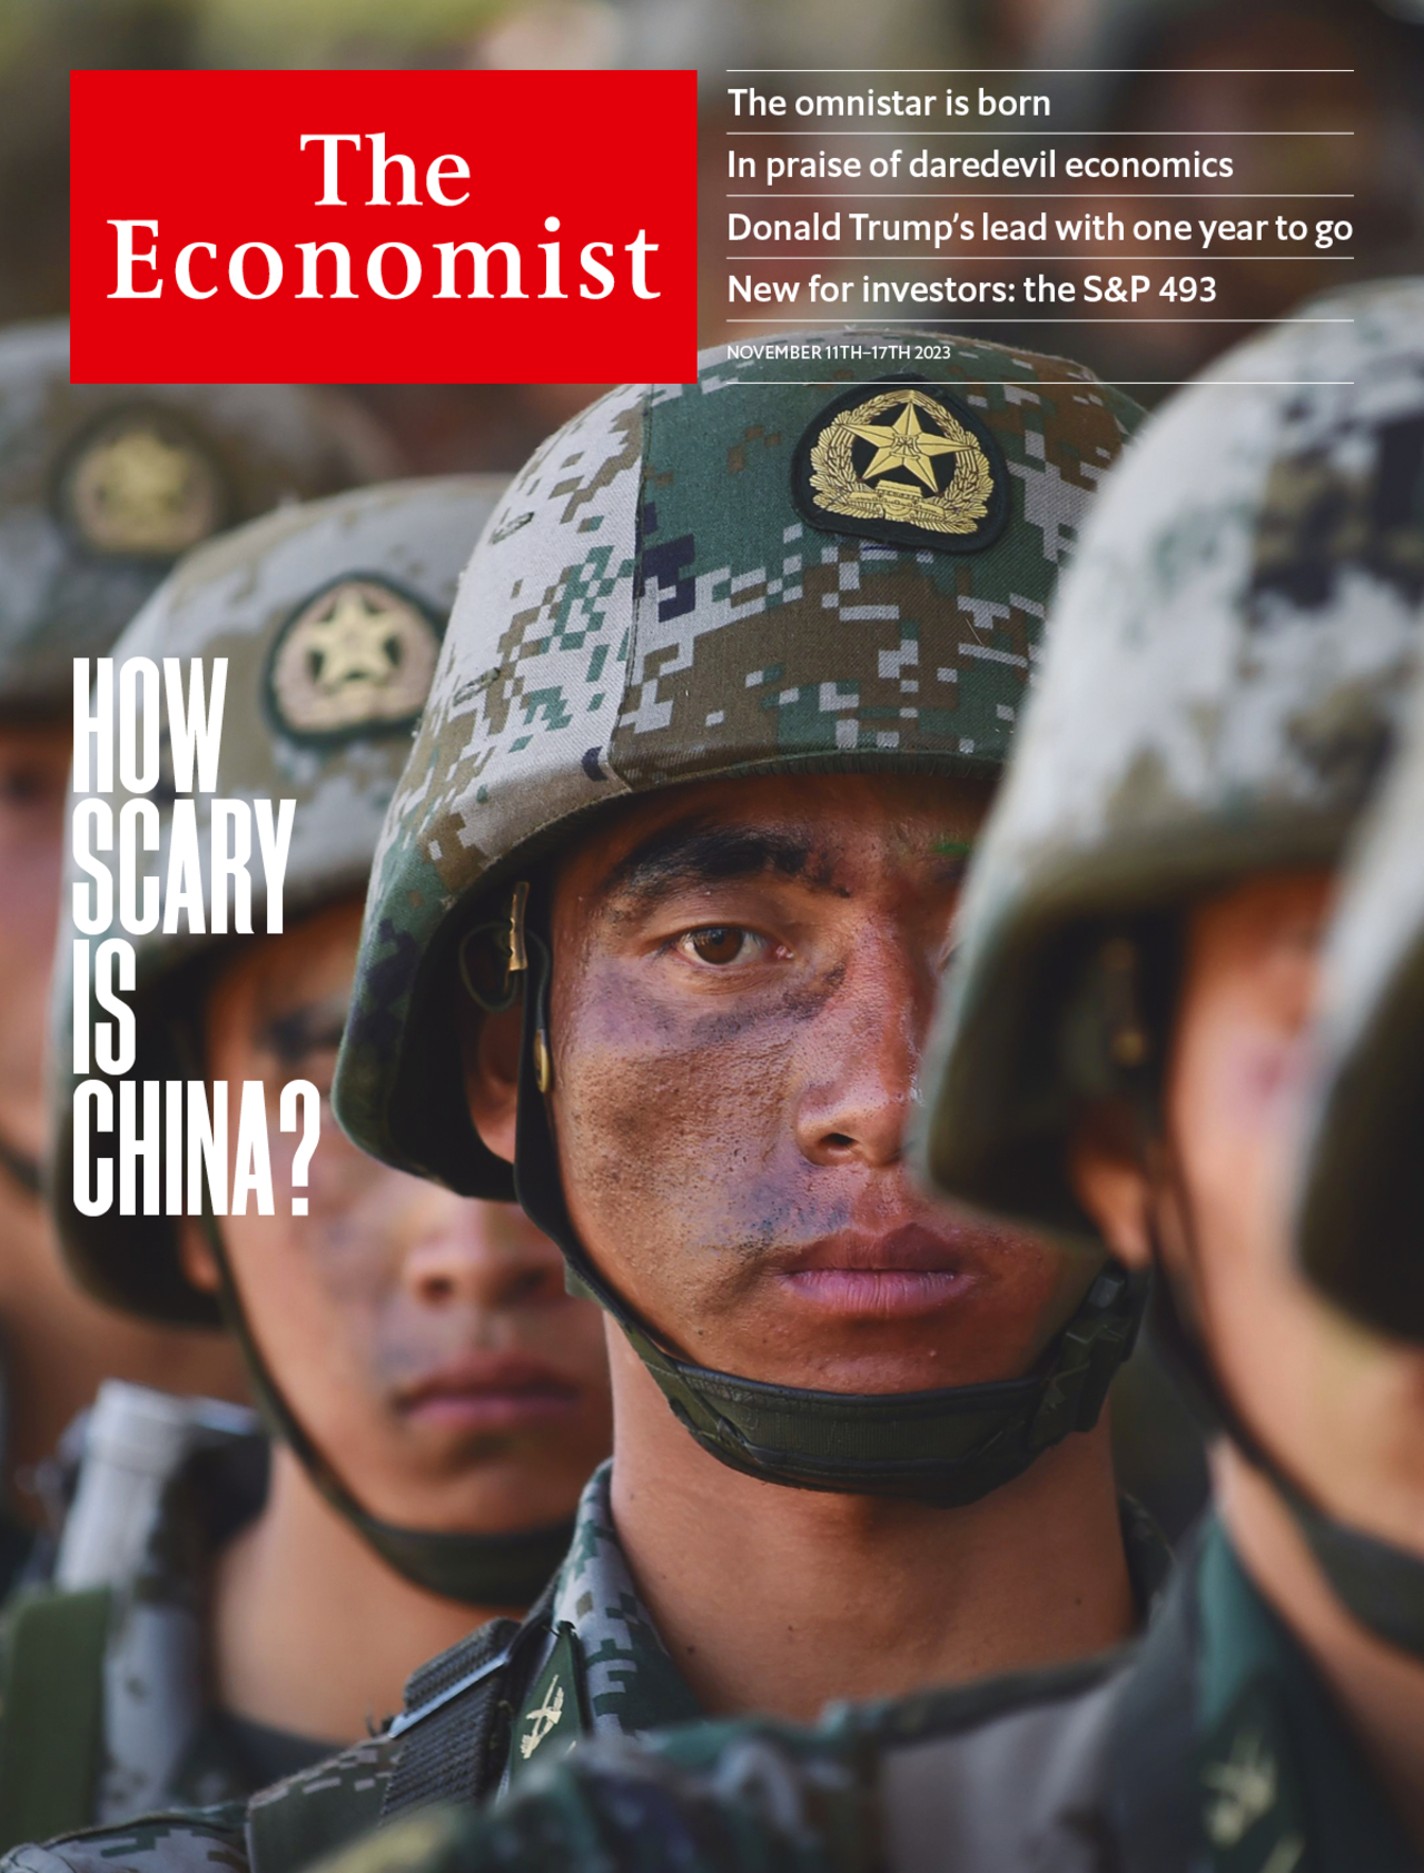 How scary is China?